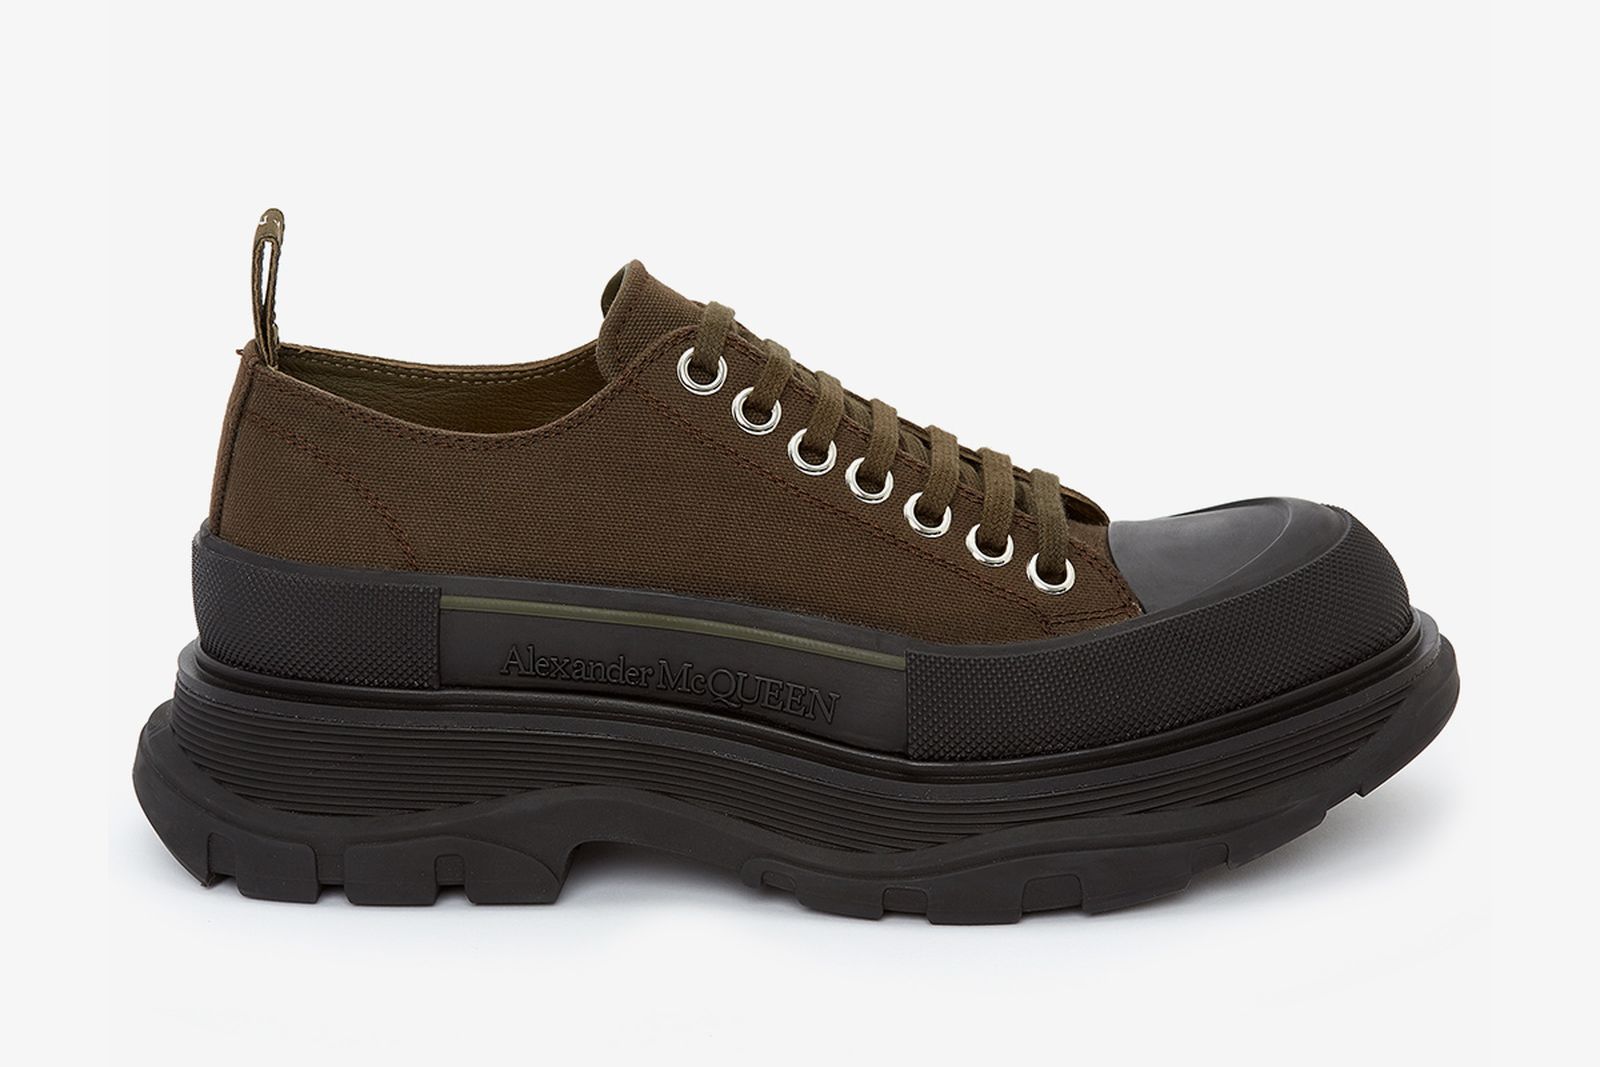 Alexander McQueen Tread Slick: Official Images & Where to Buy